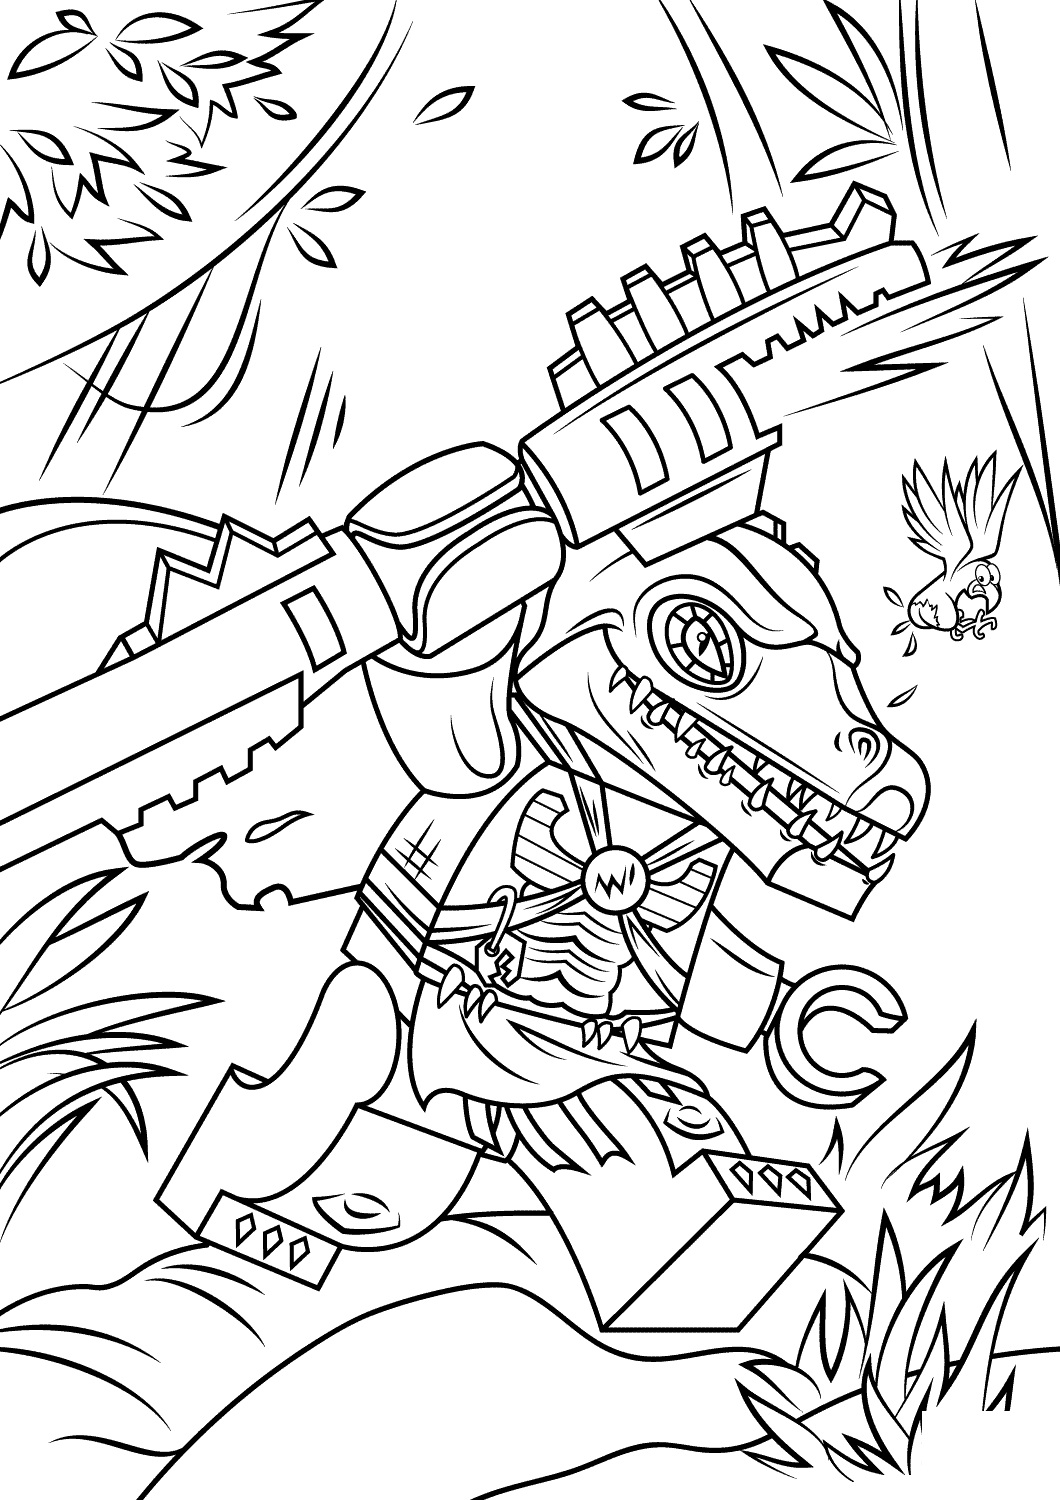 Cragger from Legends of Chima Coloring Page